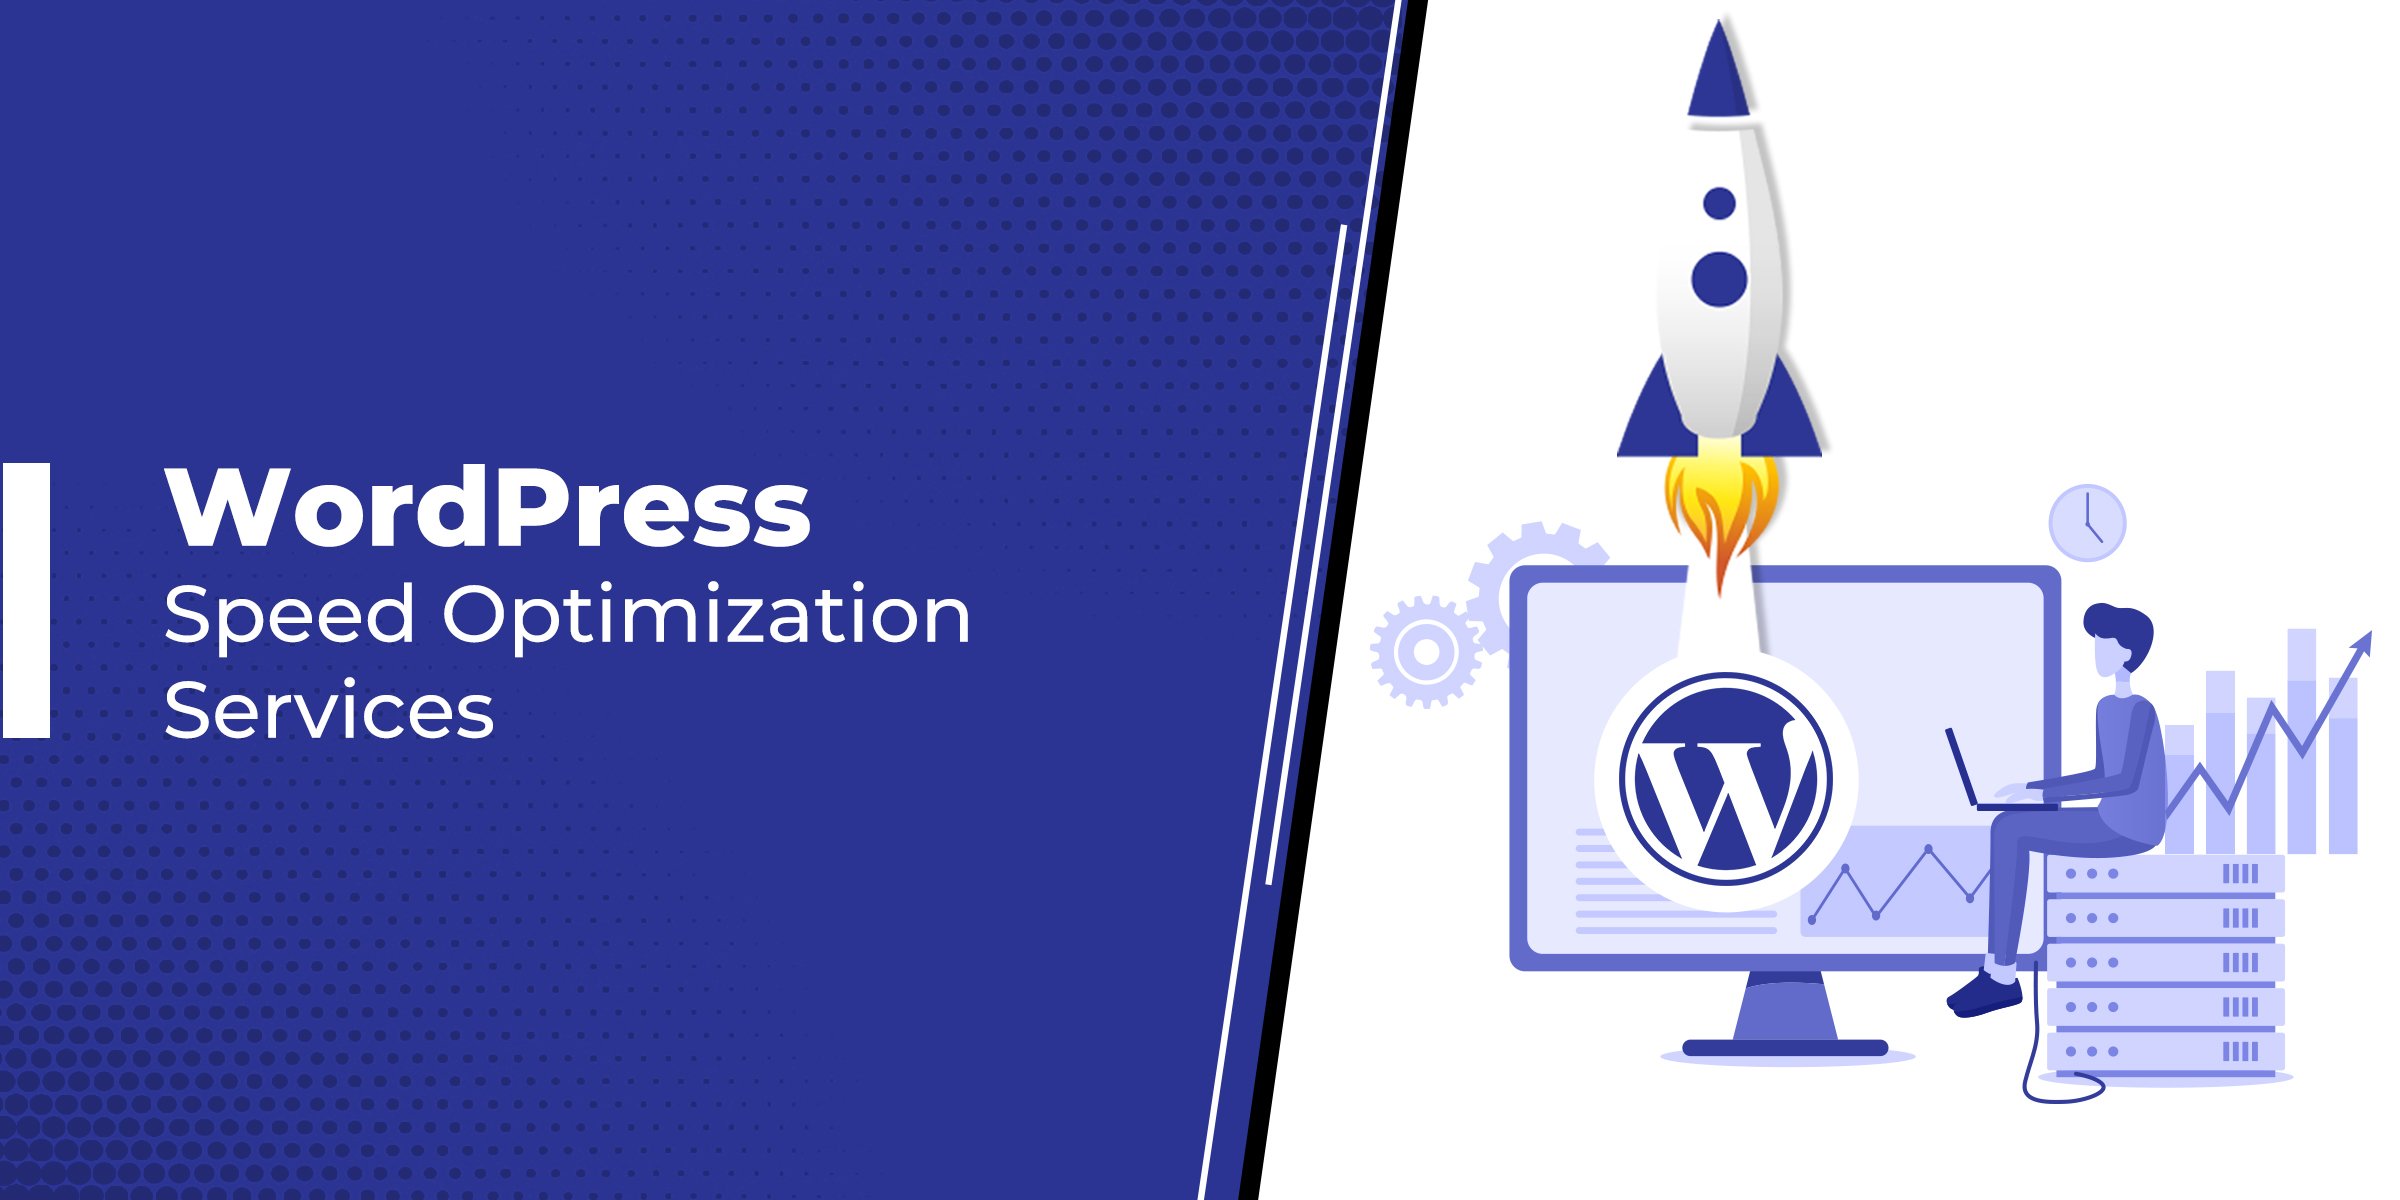 Improved Performance and Speed wordpress Development Services